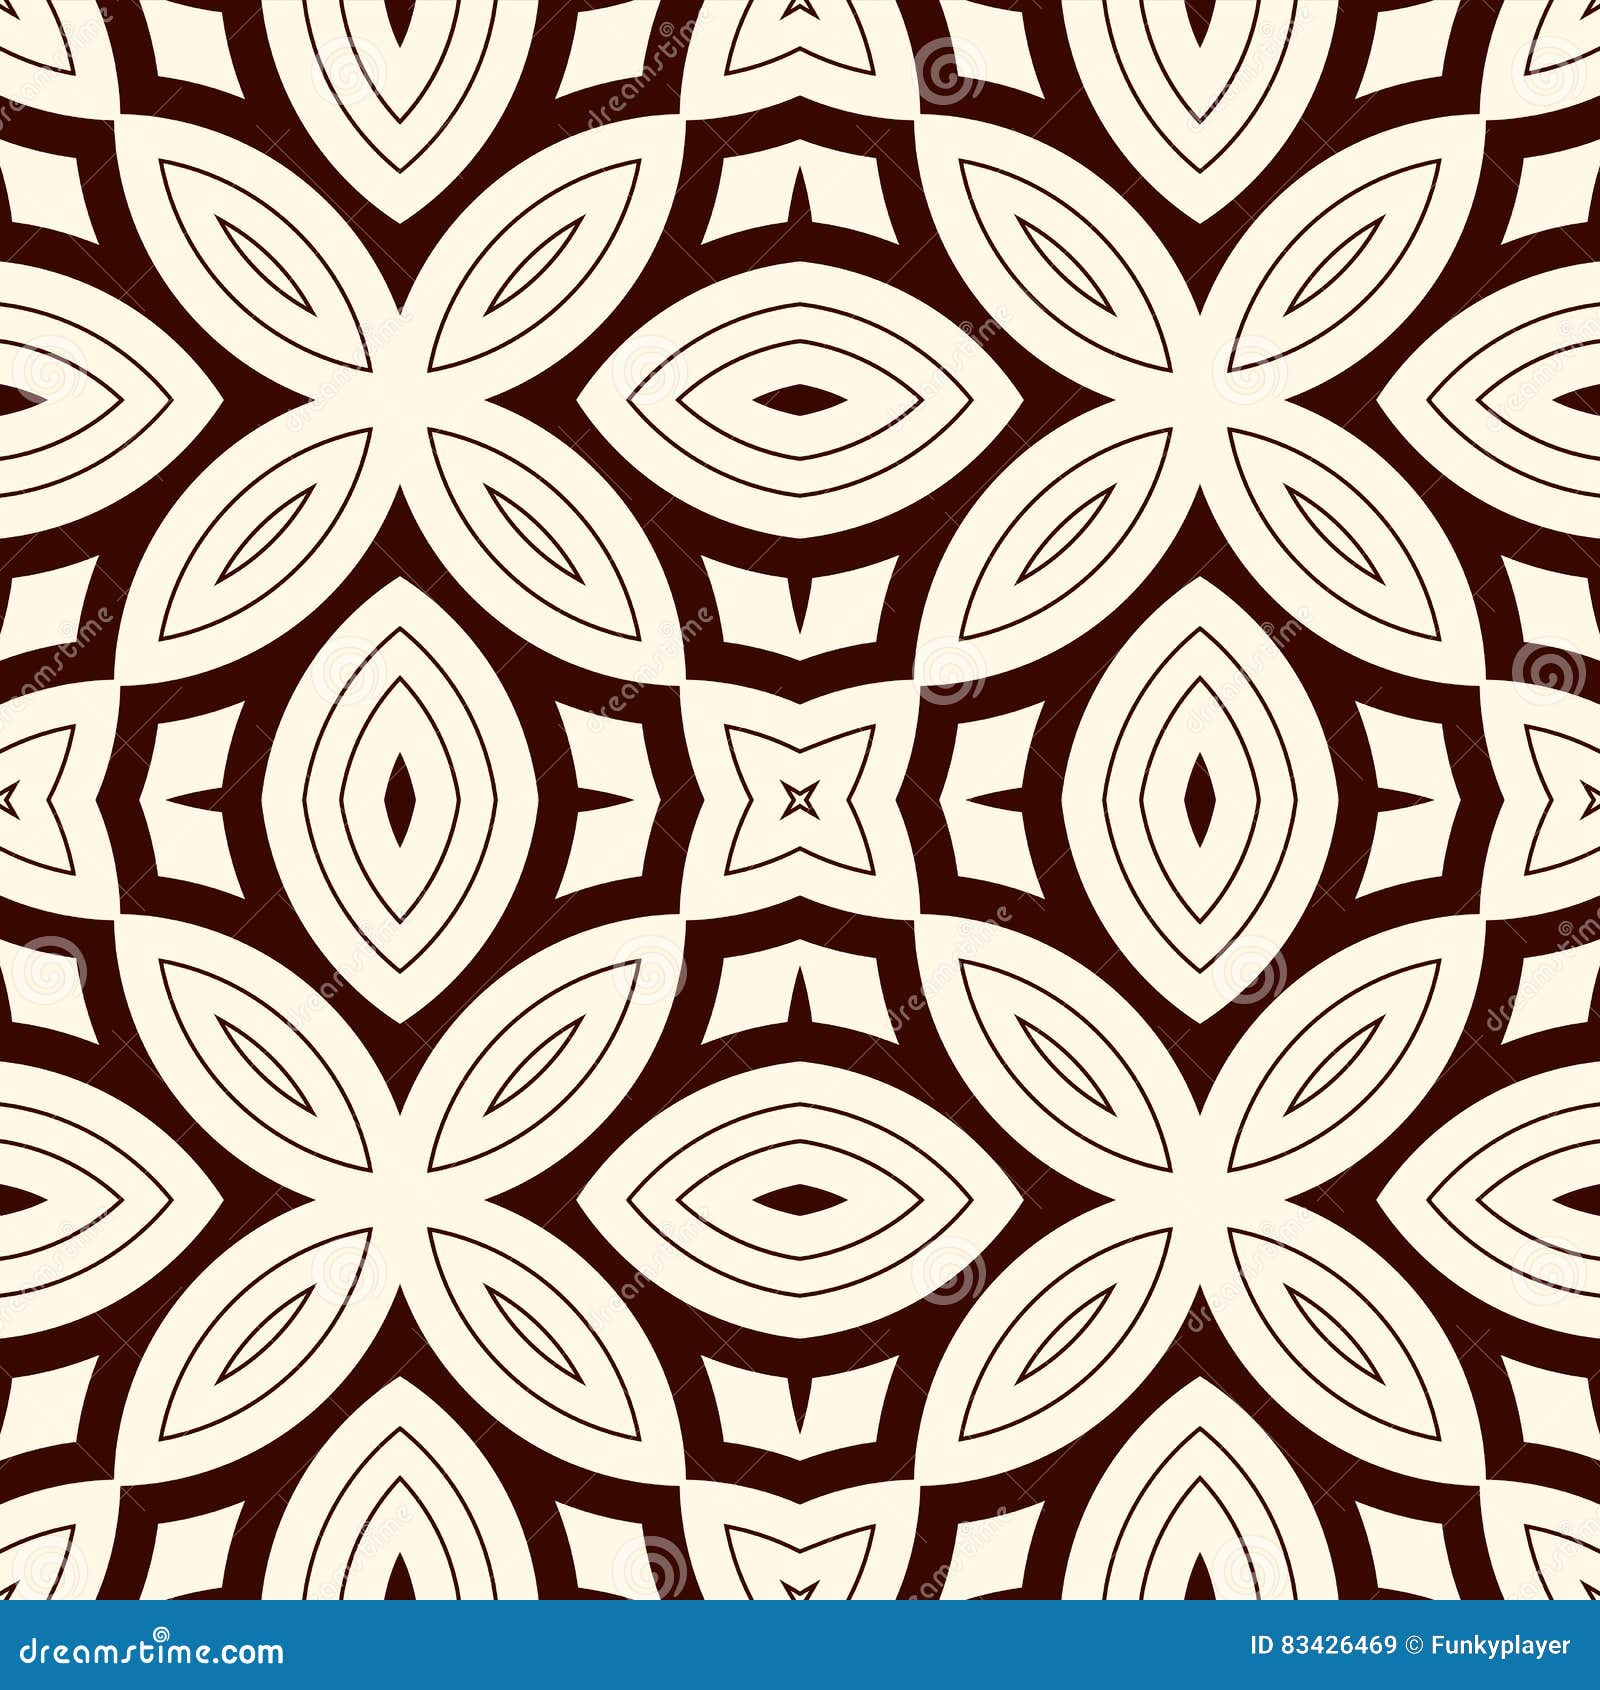 Wallpaper Outline seamless pattern with geometric figures. Repeated diamond  ornamental abstract background. Ethnic and tribal motif. Grid digital  paper, textile print, page fill. Vector art 